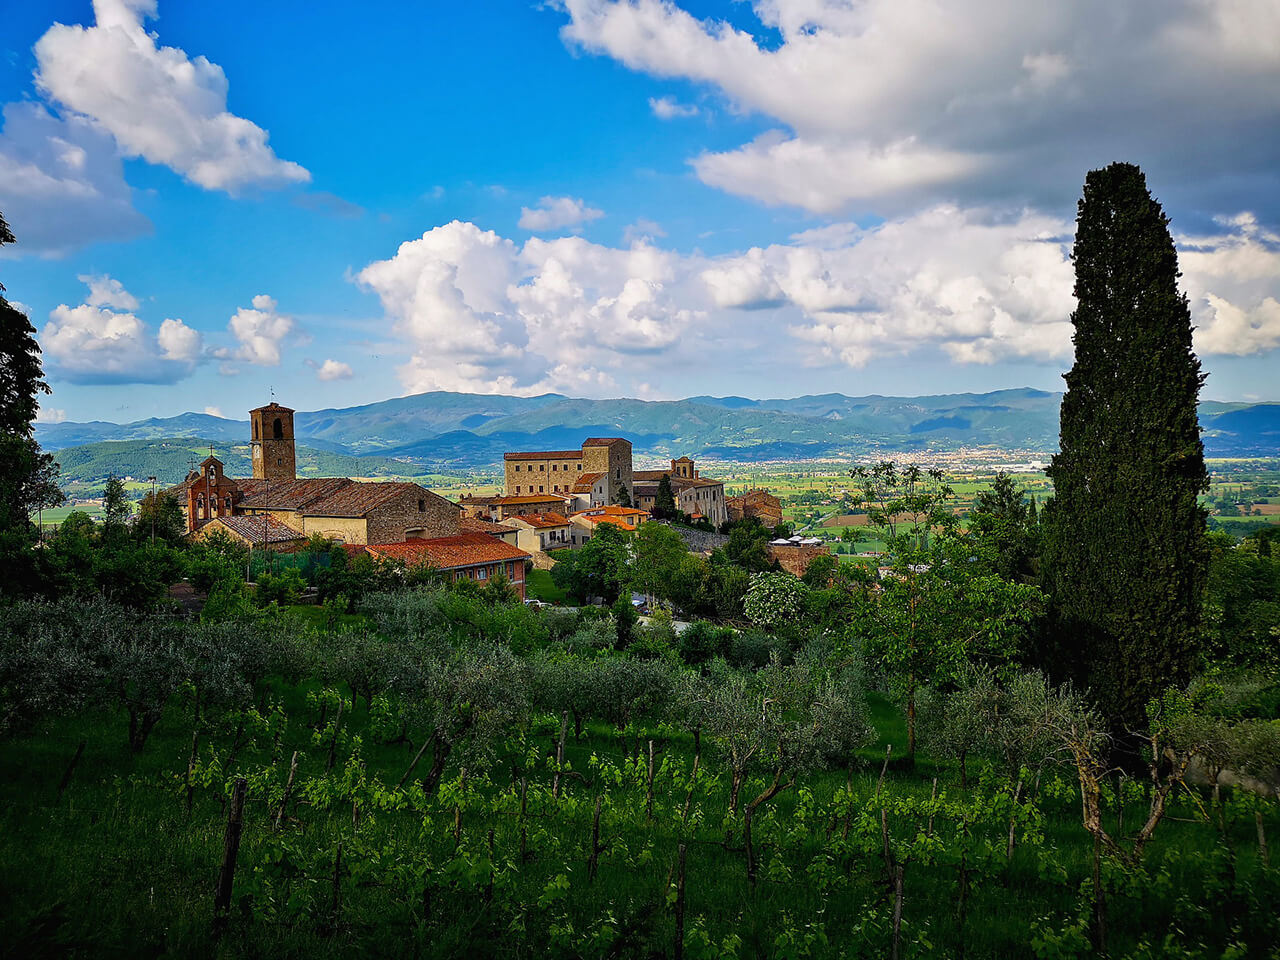 Experience the great wine of Tuscany on a wine tour or tasting in the wineries around Cortona, including the famous Chianti area.